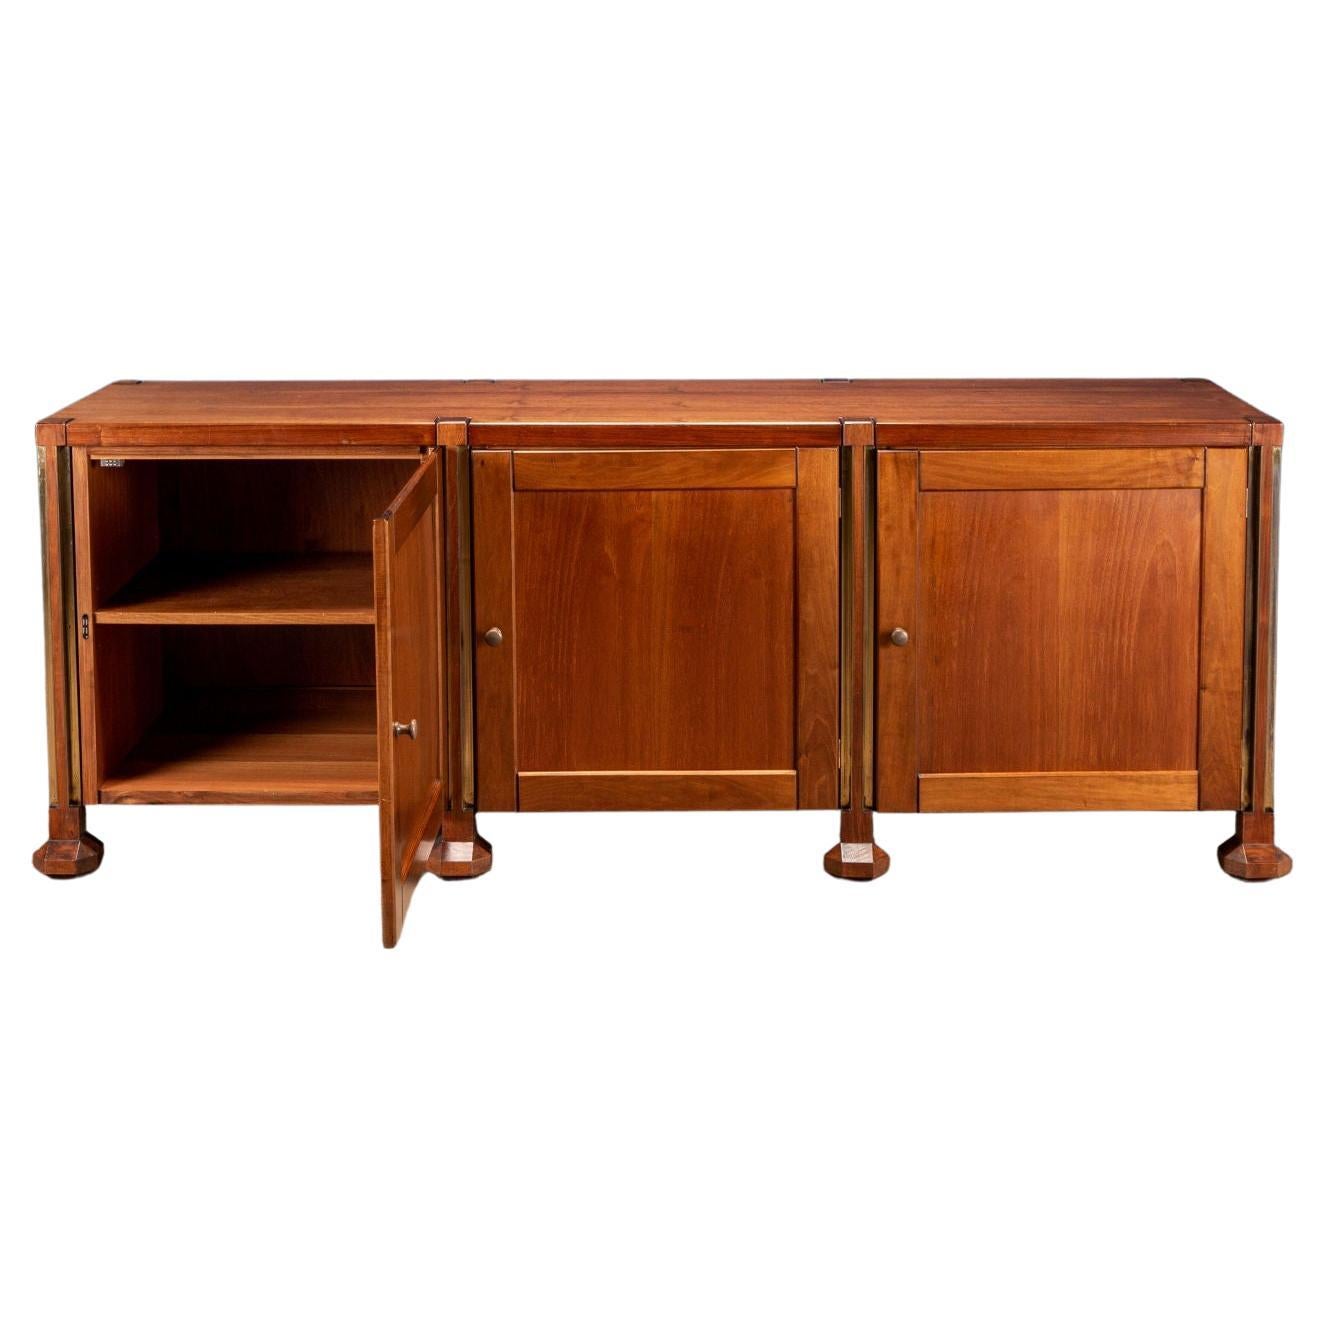 Elegant 60's sideboard of Italian manufacture. The cabinet is made up of uprights with brass profiles ending with polyhedral feet and storage compartments with hinged doors. Walnut veneer.